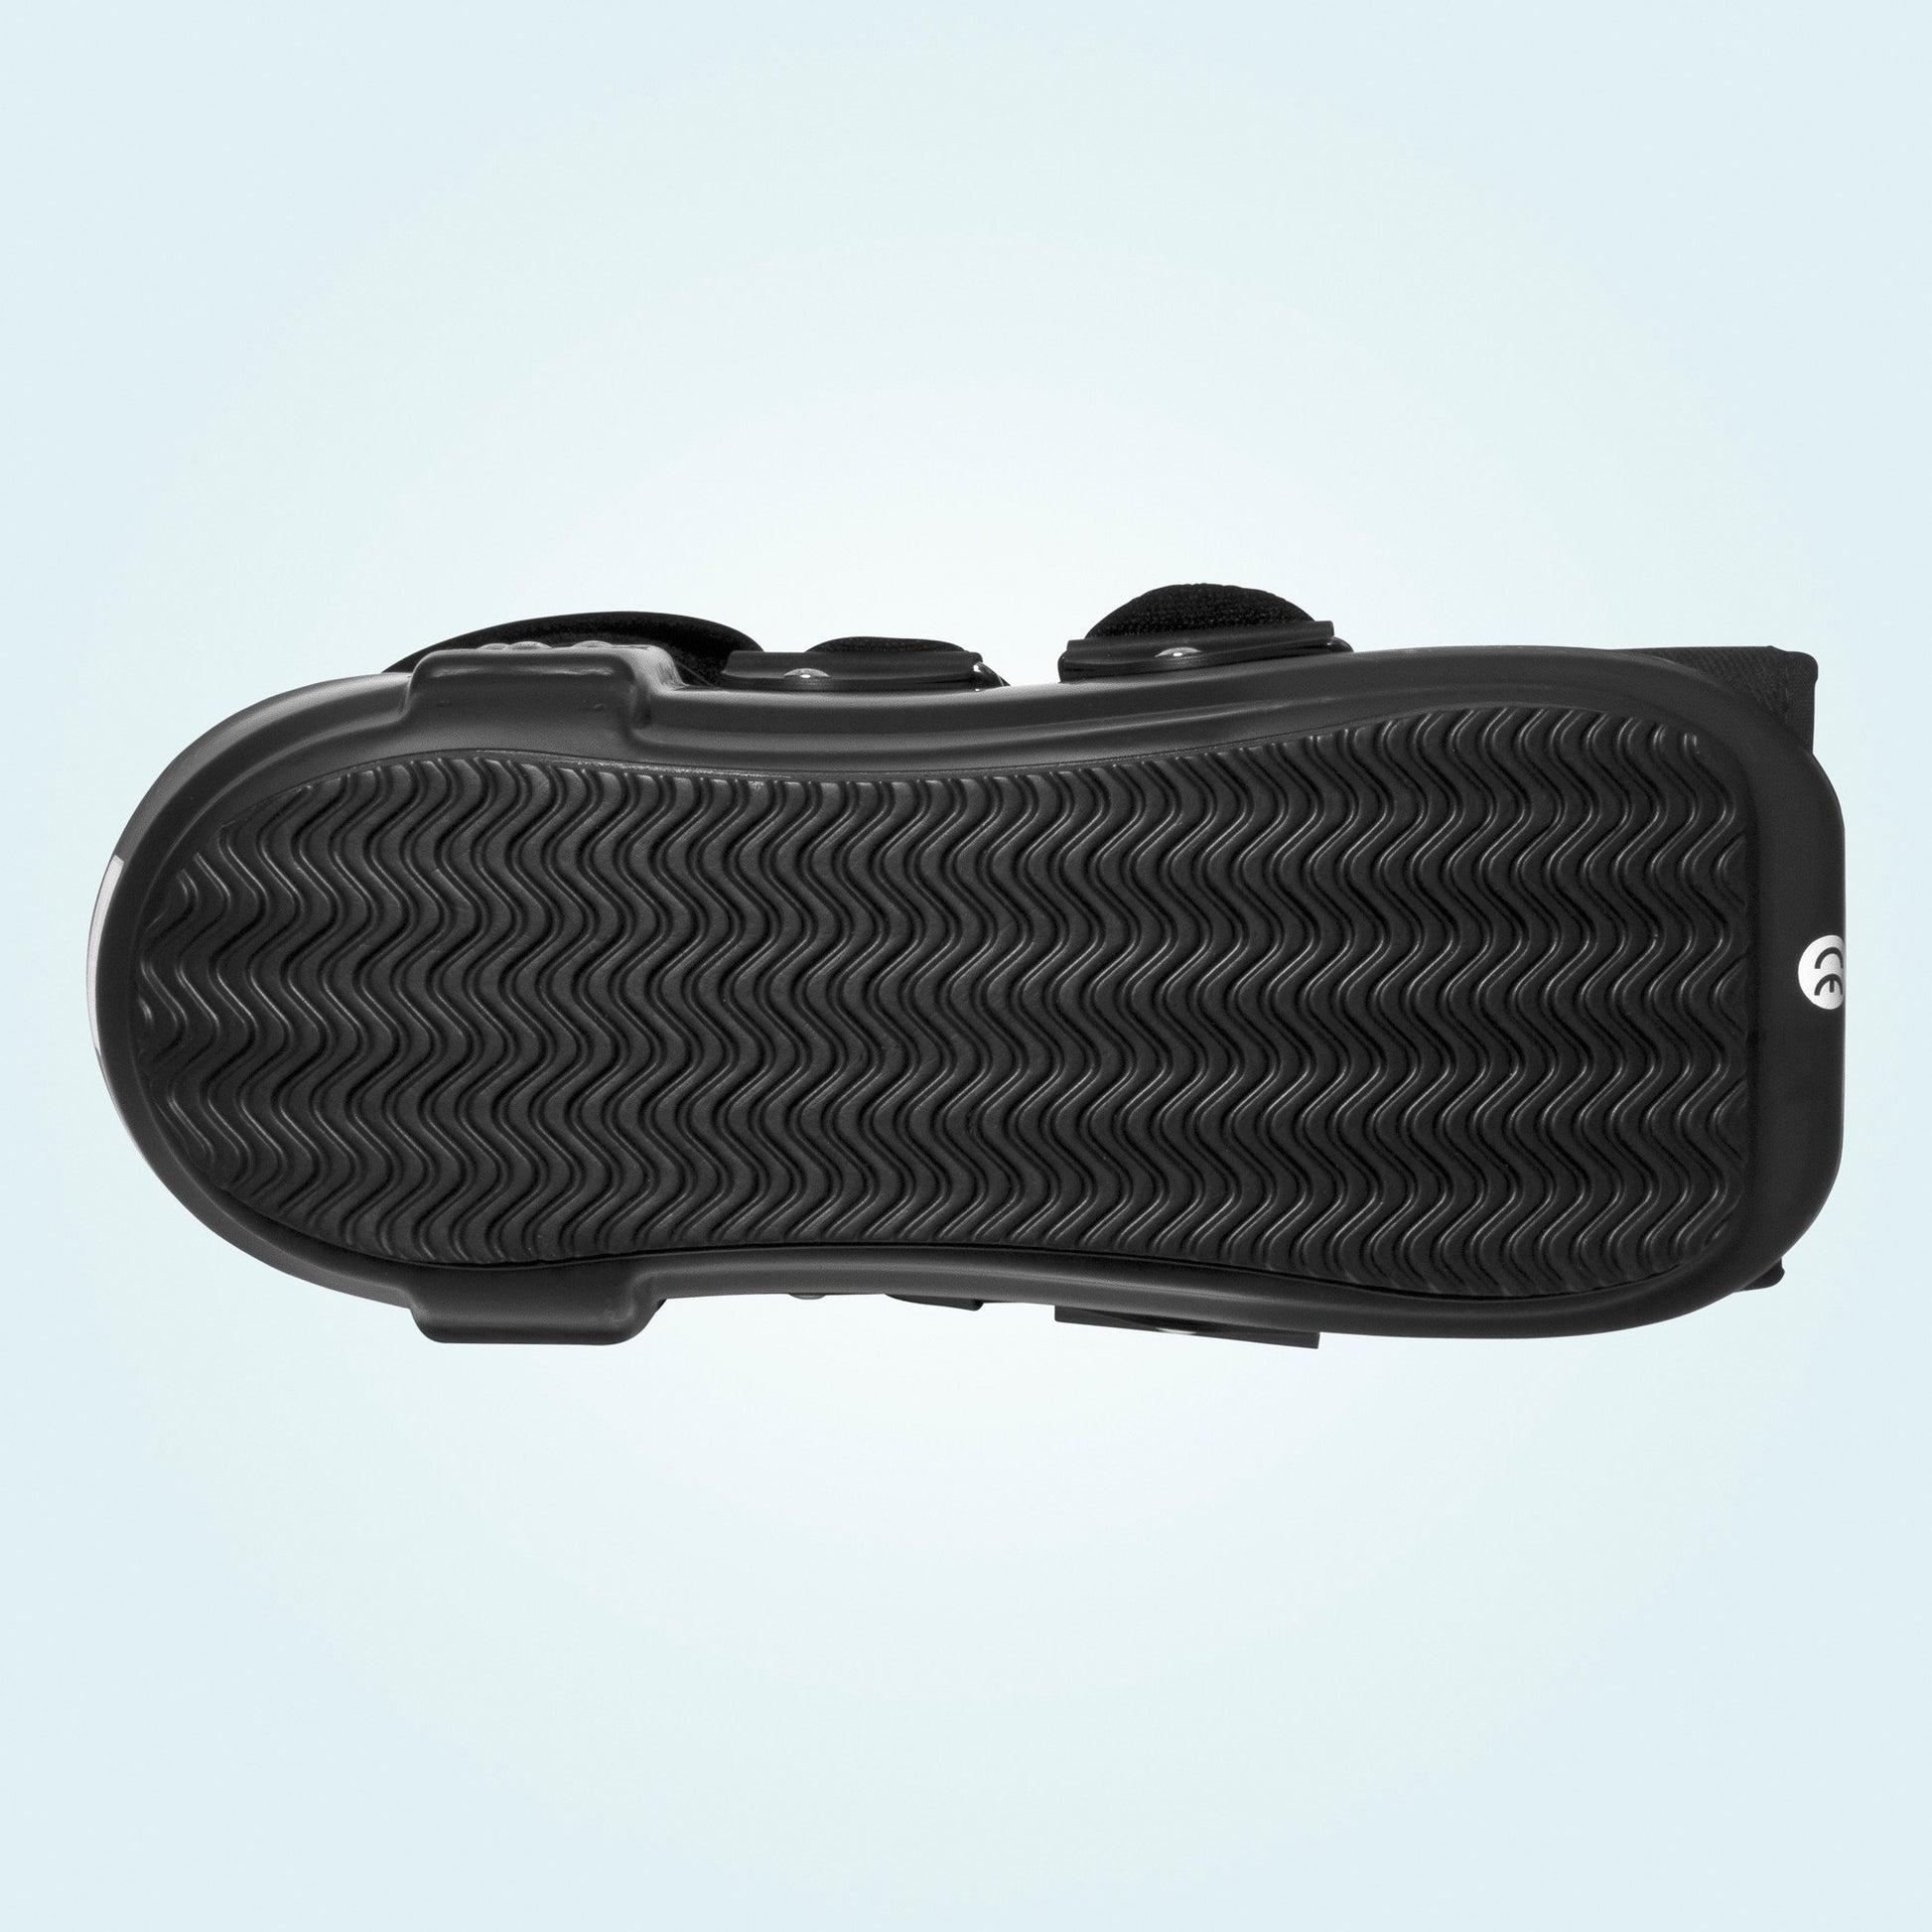 The Benecare ROM Boot's impact resistance shock absorbing sole.